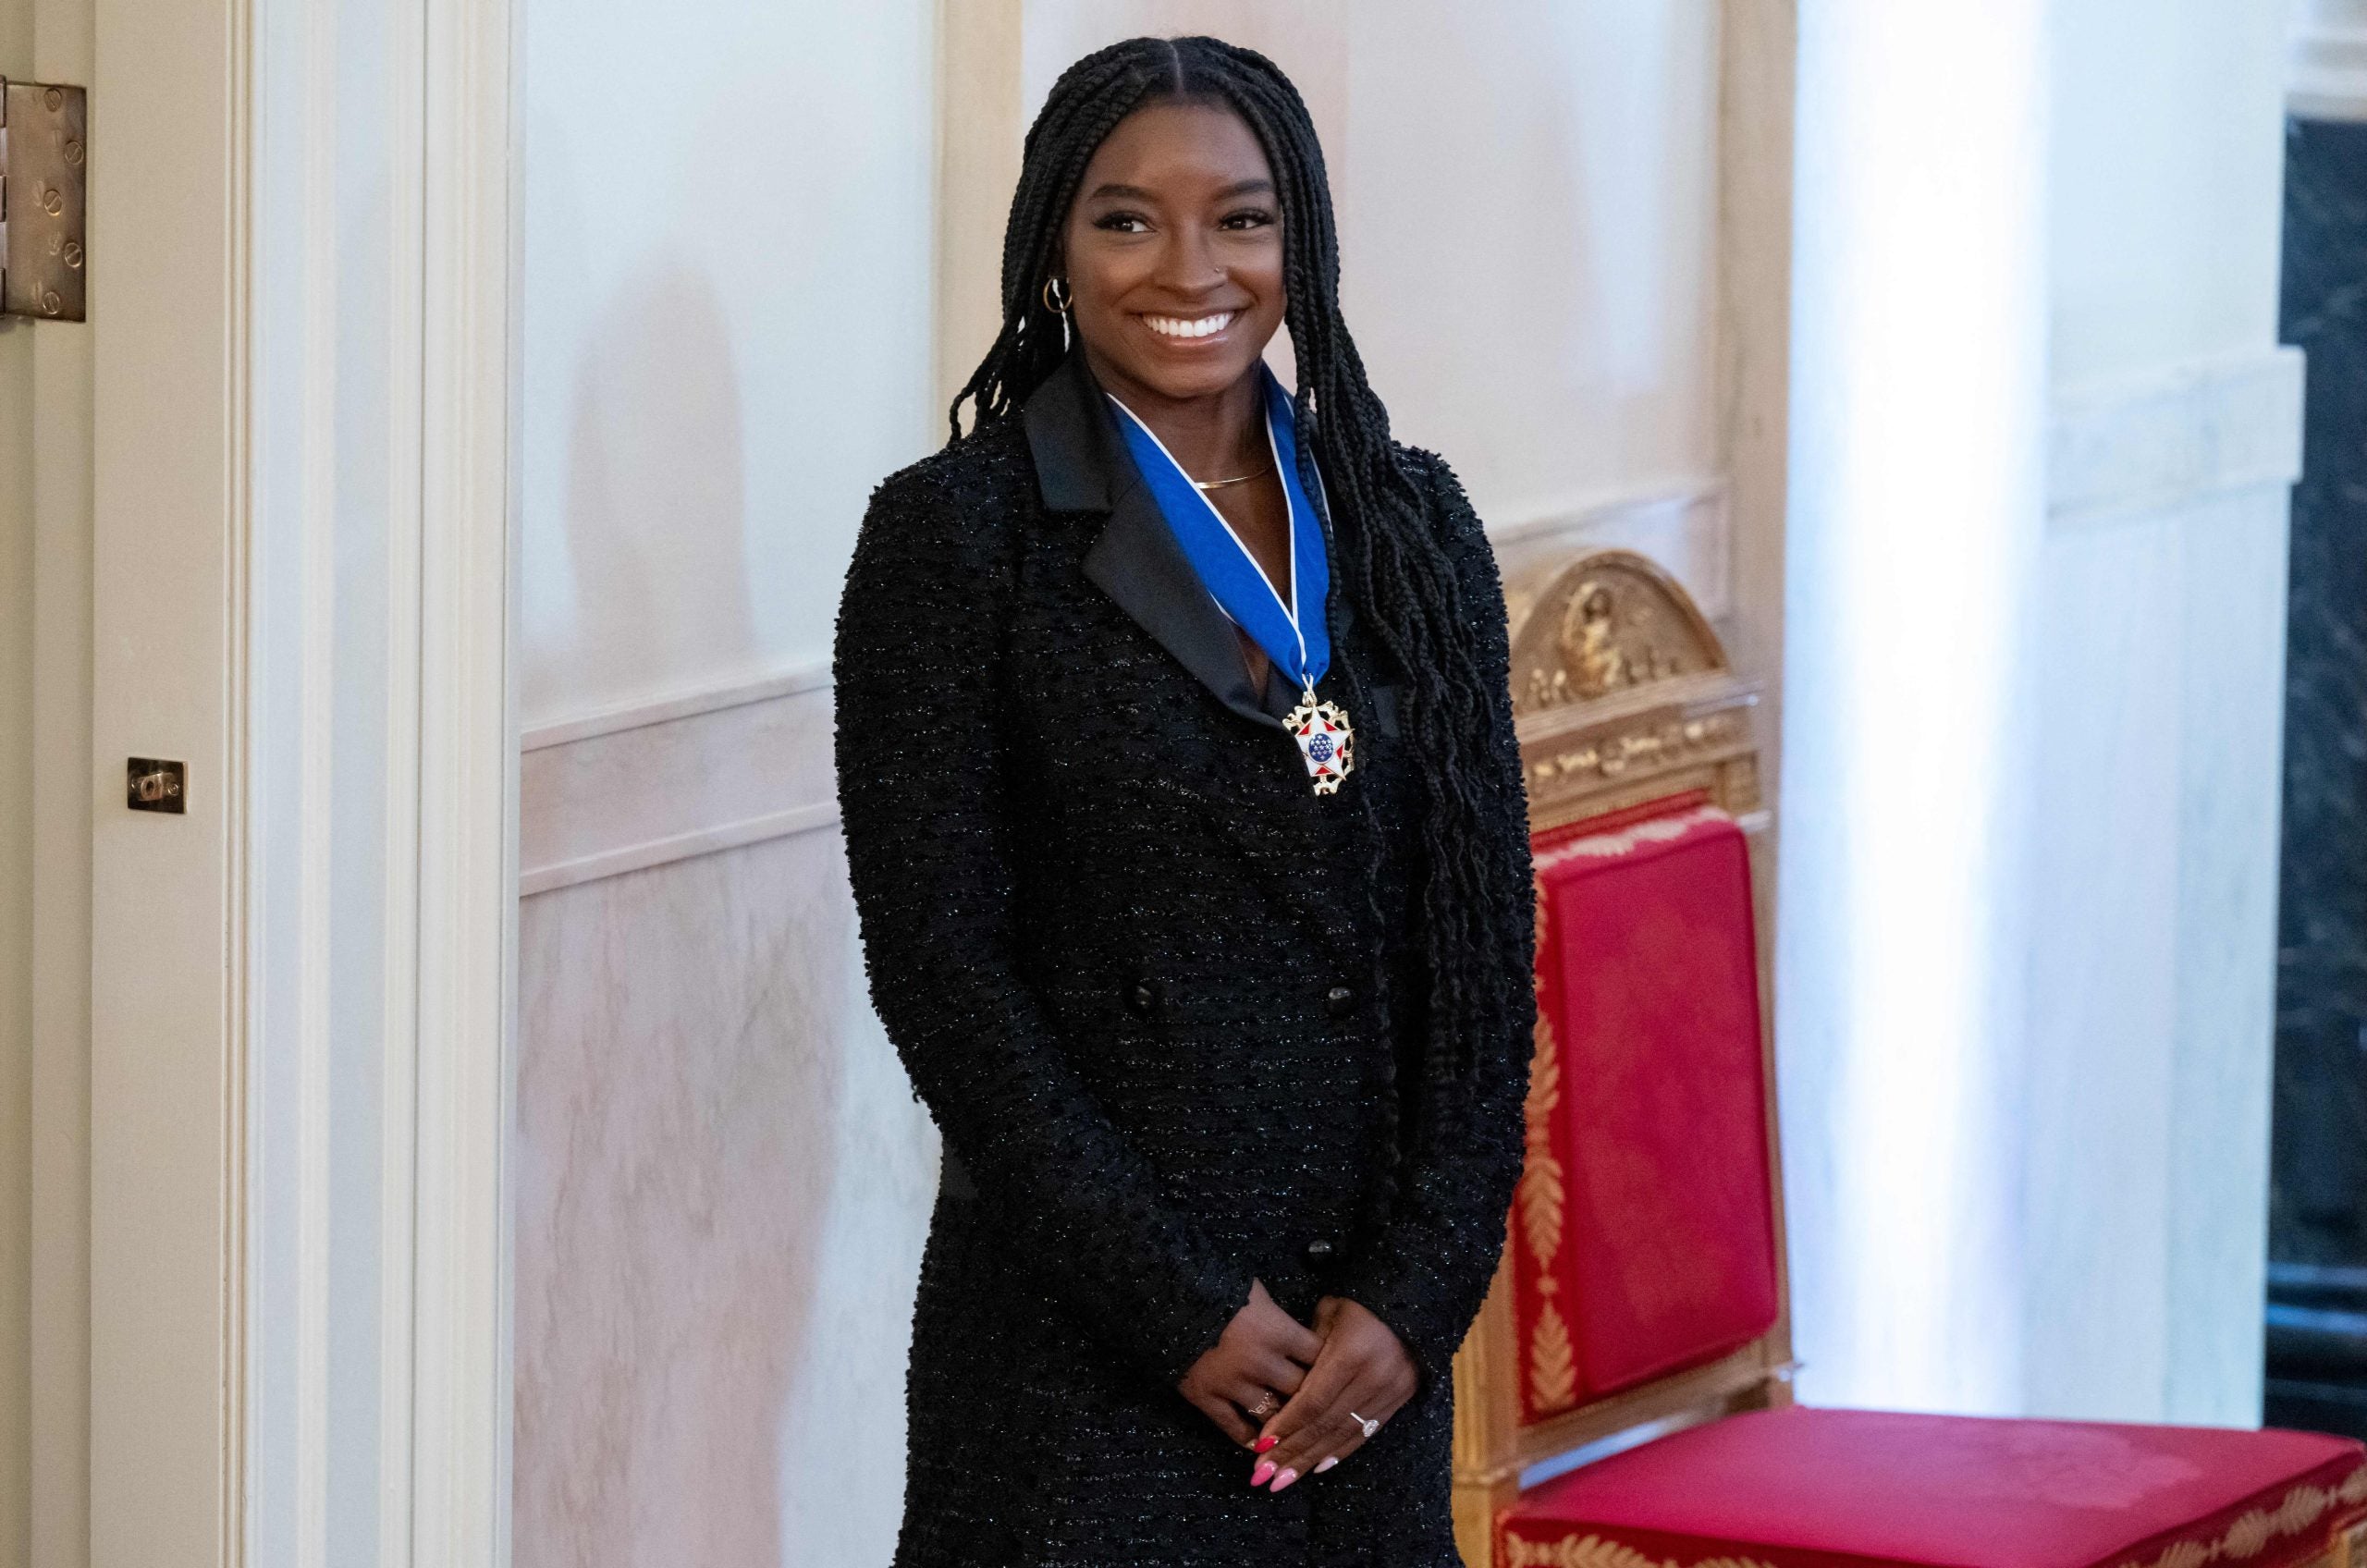 Simone Biles Honored With Presidential Medal of Freedom